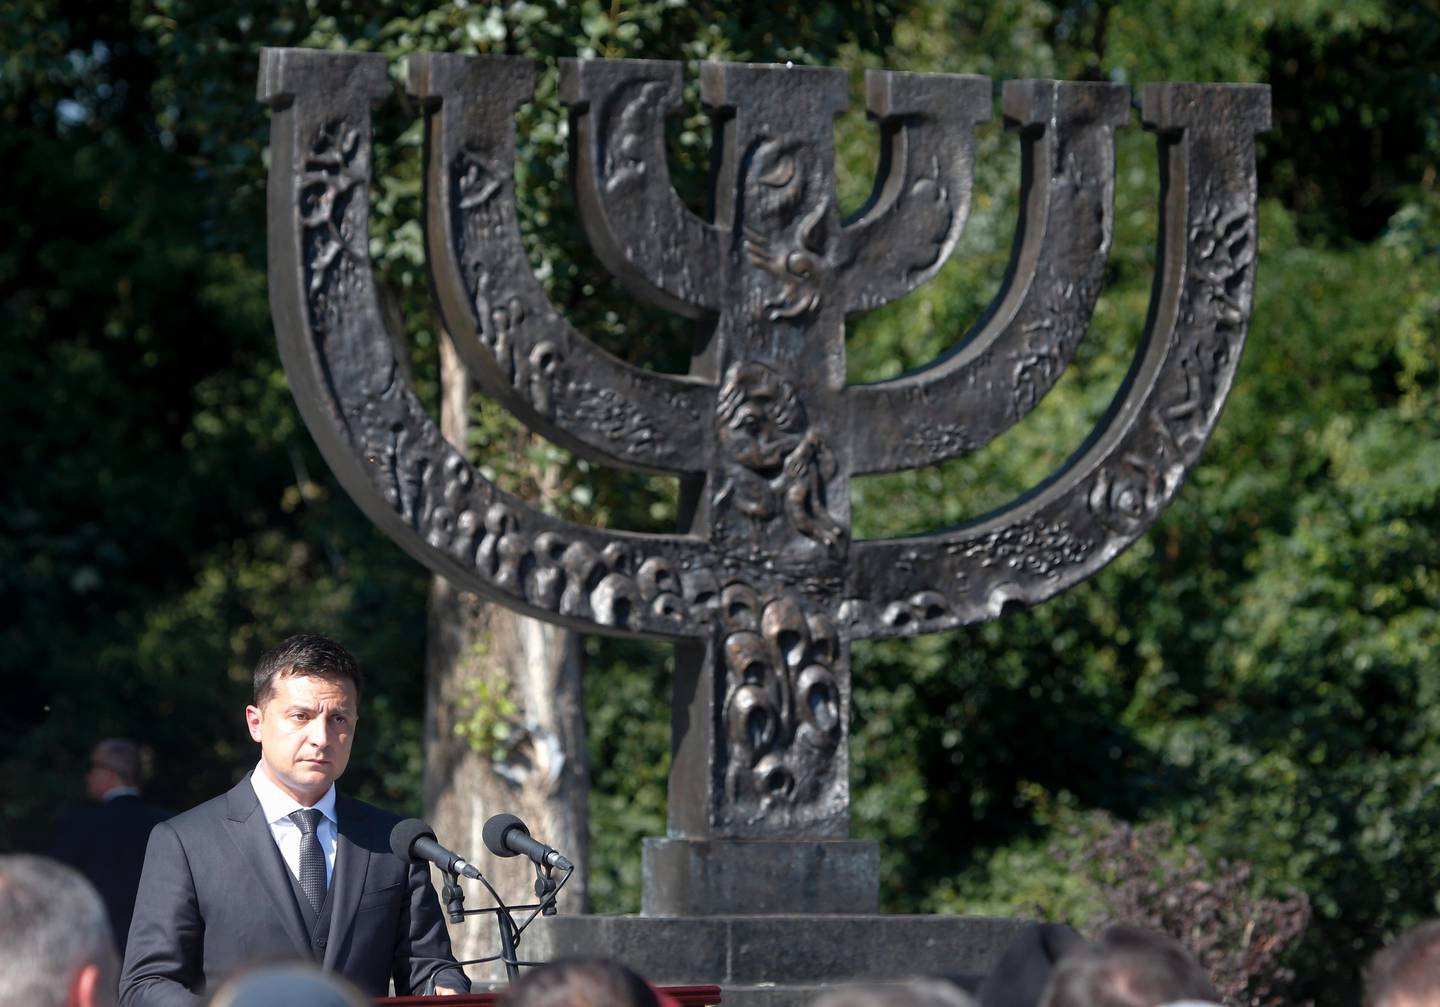 Ukrainian President Volodymyr Zelenskiy delivers his speech at the Menorah monument as he and Israeli Prime Minister Benjamin Netanyahu visit the Babi Yar ravine where Nazi troops machine-gunned many thousands of Jews during WWII, in Kyiv, Ukraine, Monday, Aug 19, 2019. Netanyahu said he plans to discuss ways to expand trade between Israel and Ukraine during the talks with Ukrainian President Volodymyr Zelenskiy. ( AP Photo/Efrem Lukatsky)